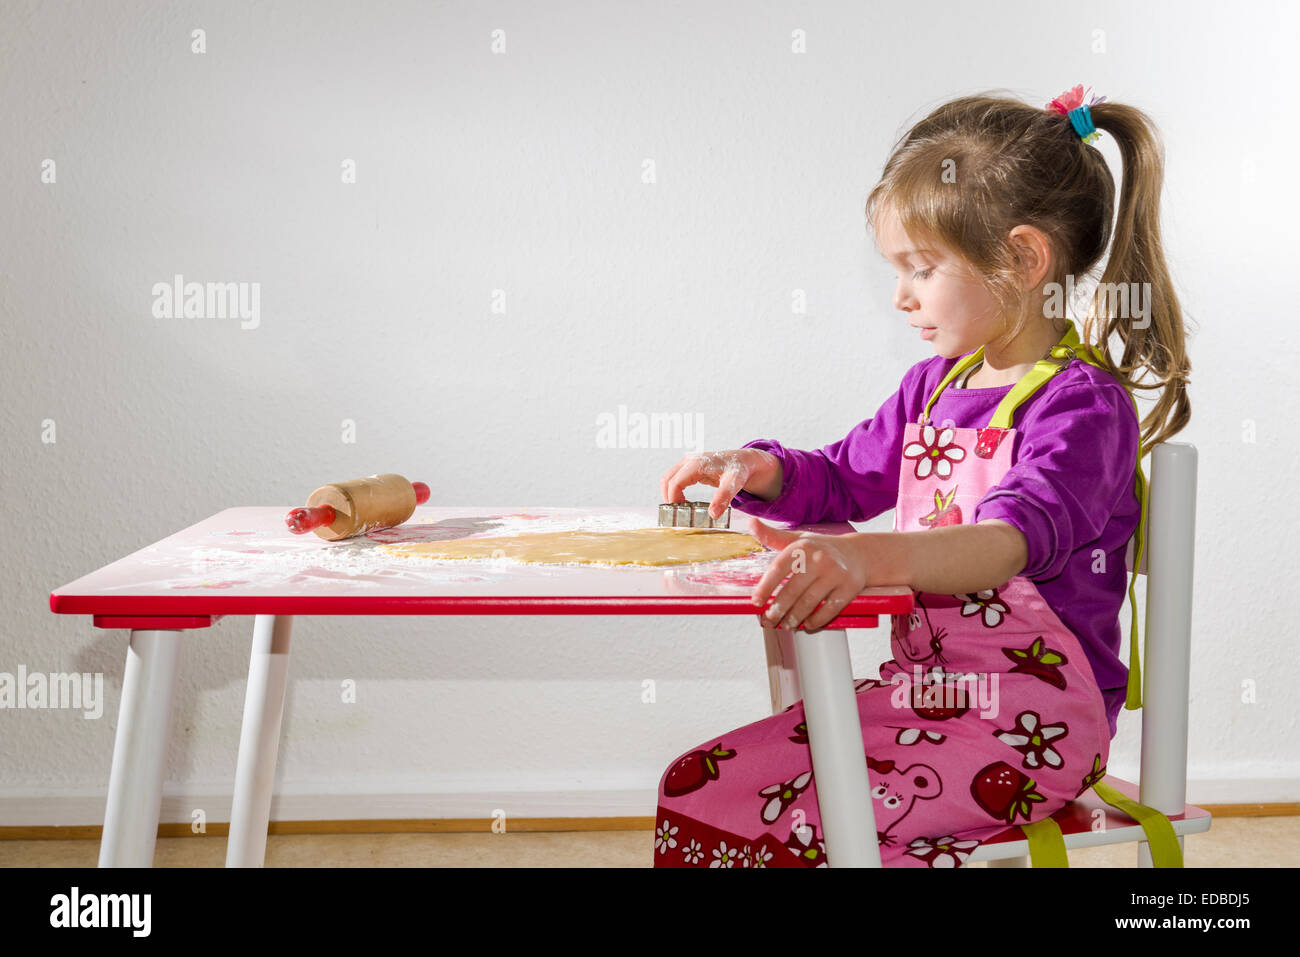 Fille, 3 ans, baking Christmas Cookies Banque D'Images